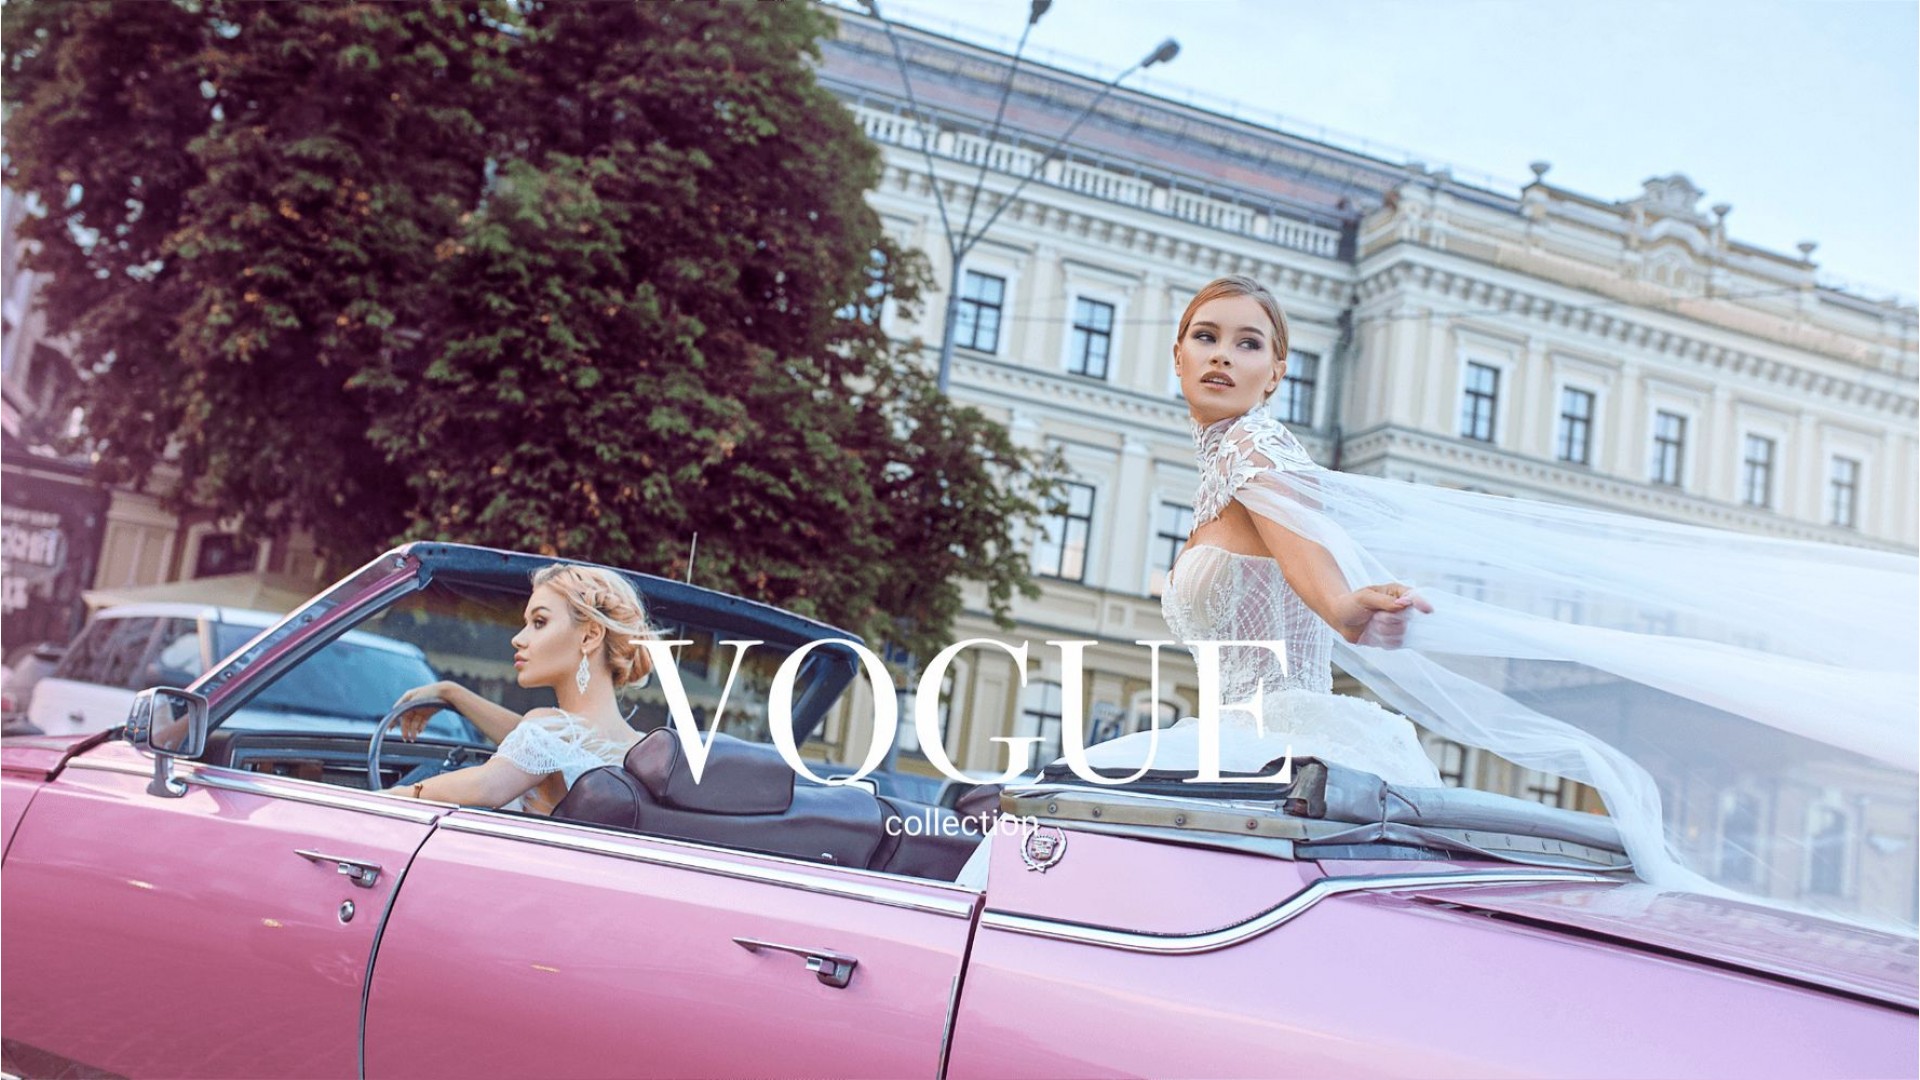 VOGUE COLLECTION